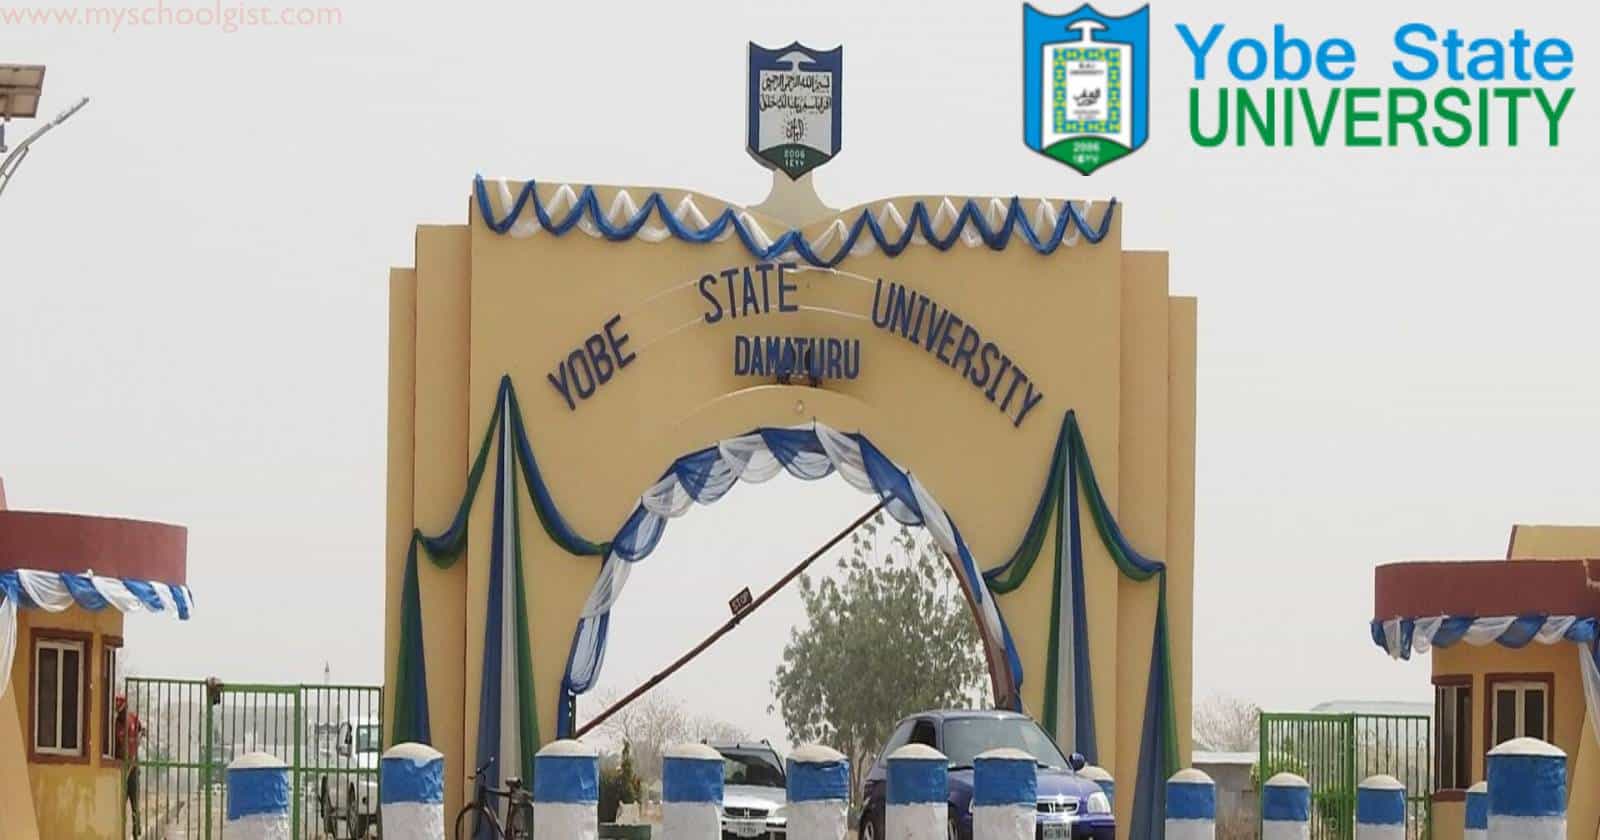 Yobe State University (YSU) Student Evaluation of Lecturers Questionnaire